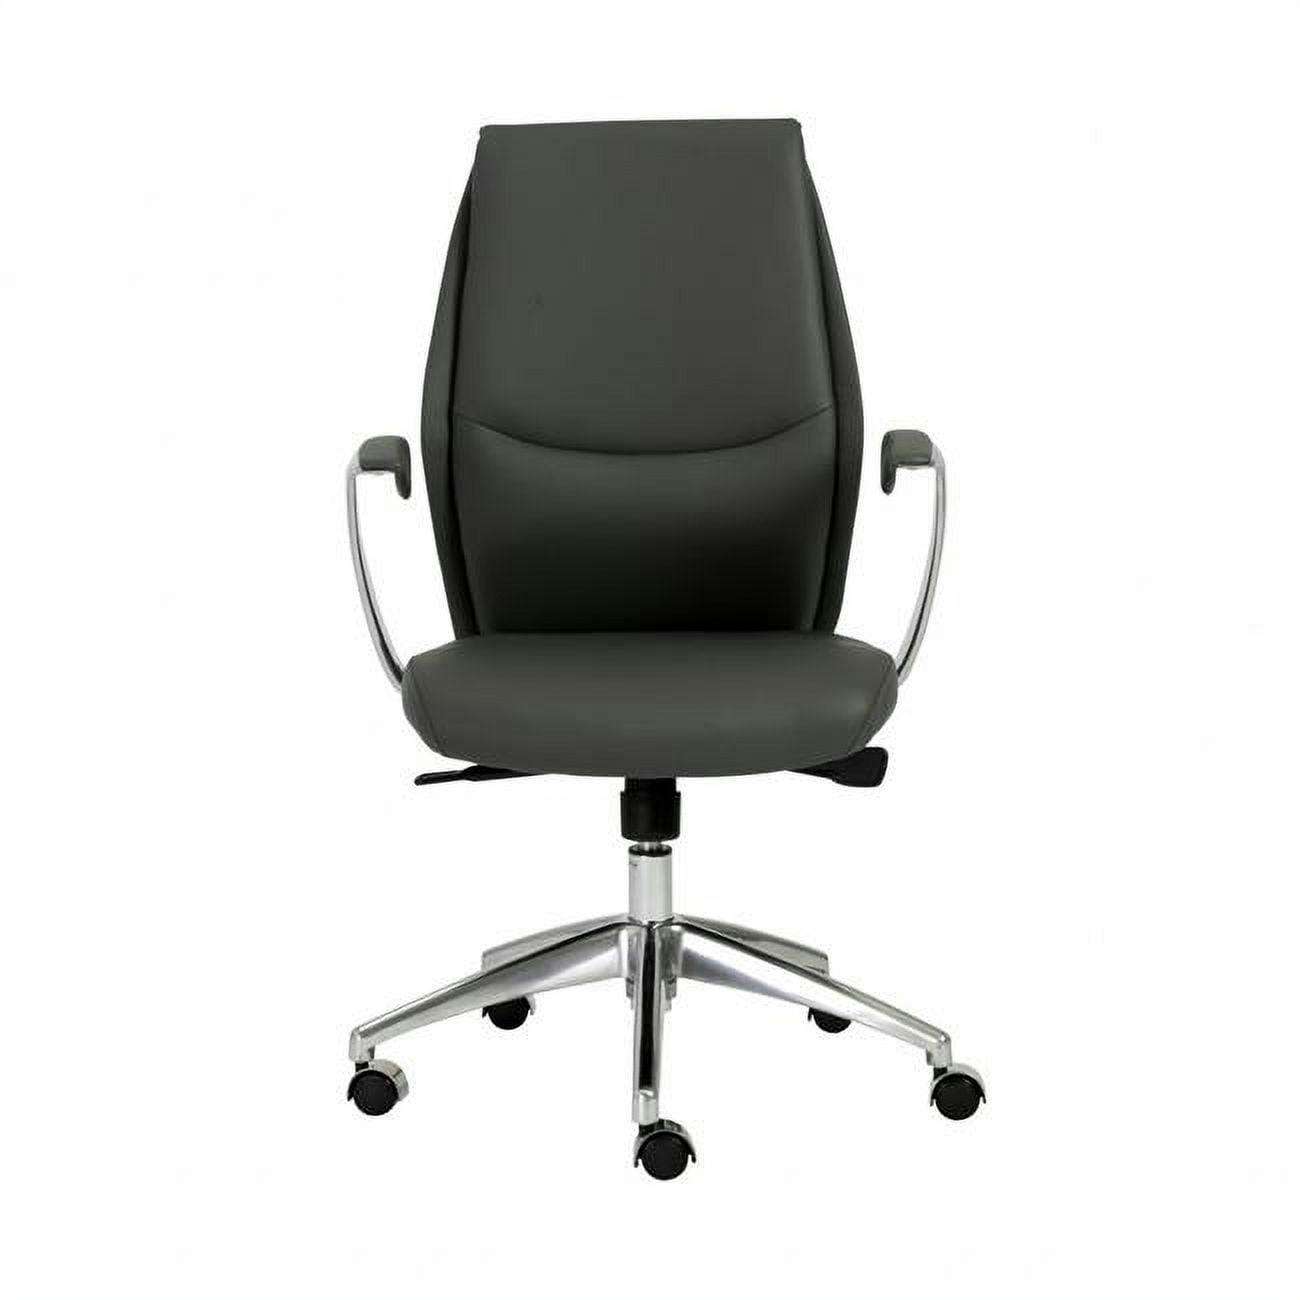 ErgoFlex Adjustable Gray Leather Office Chair with Polished Aluminum Base